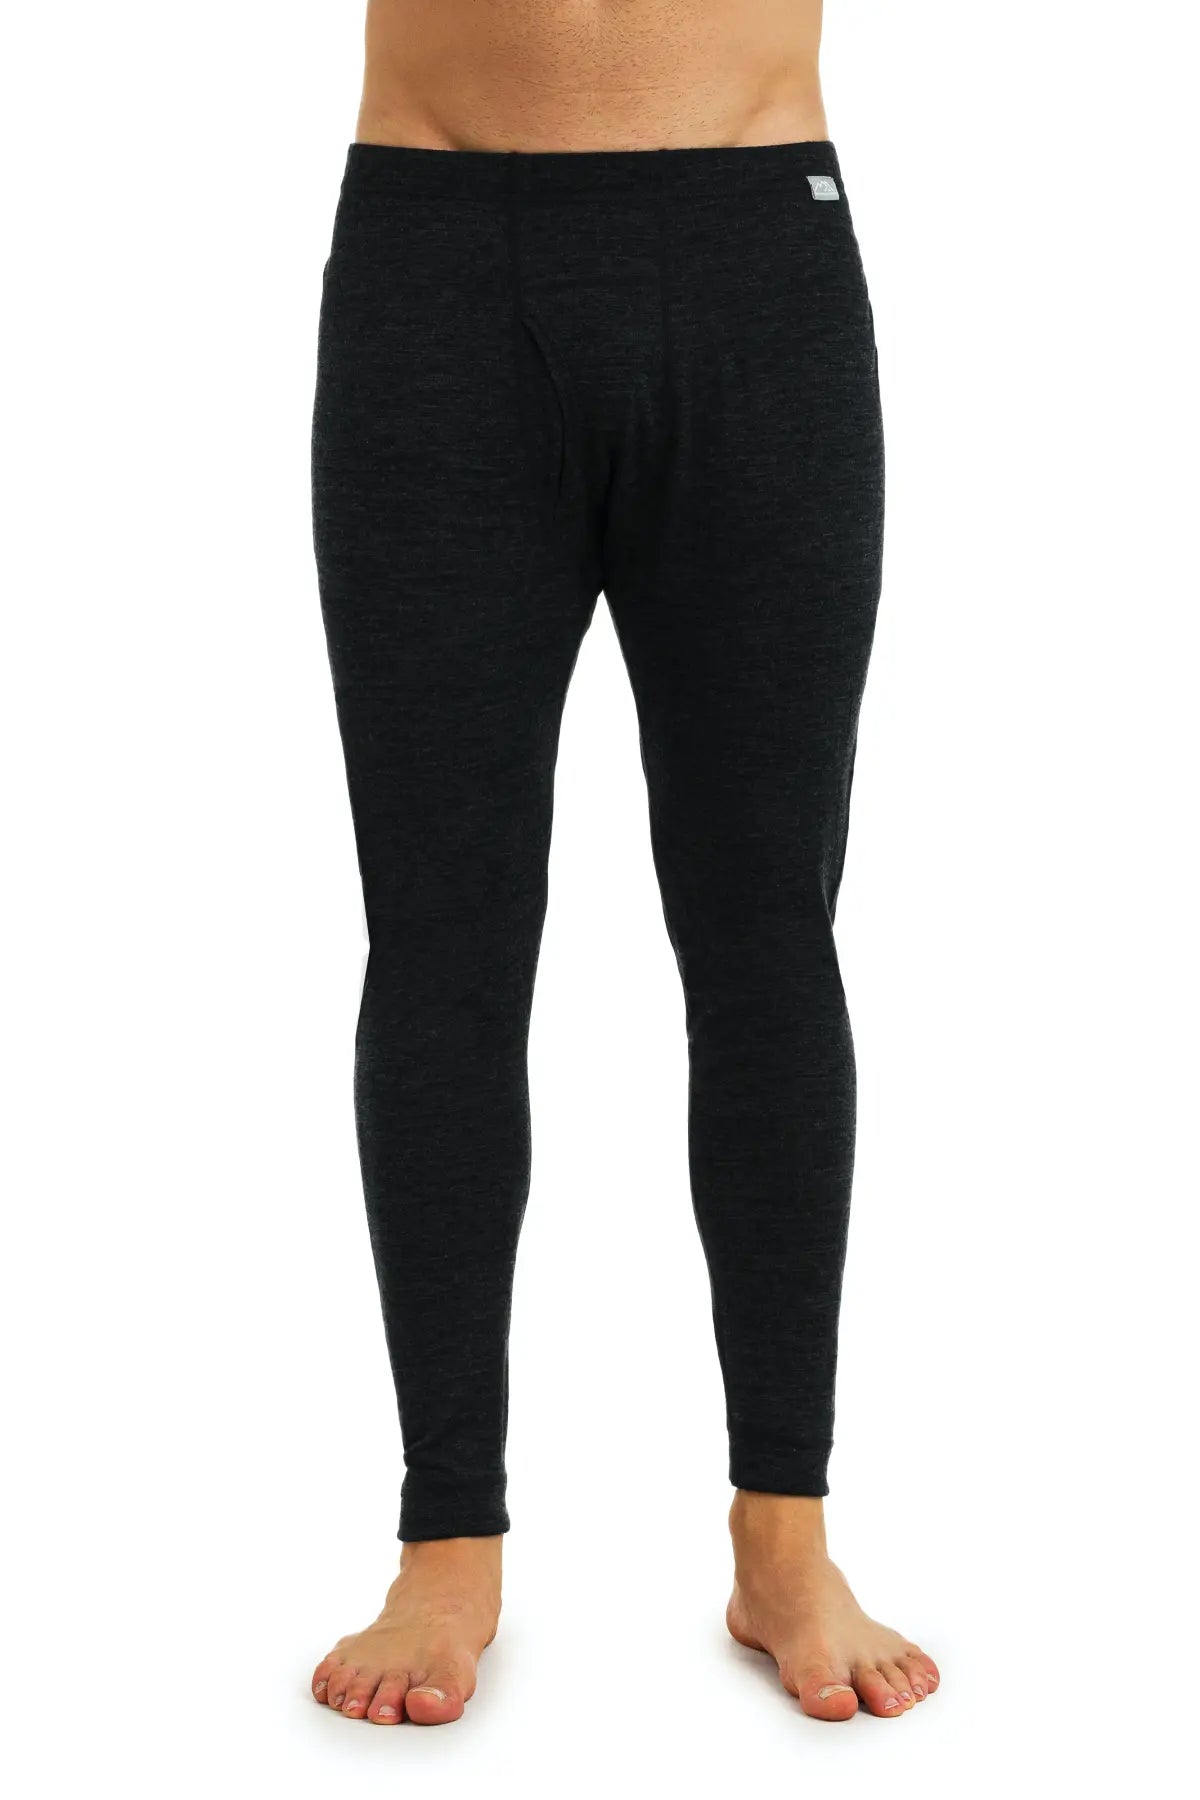 Explore Men's Base Layer Bottoms for Ultimate Warmth & Performance